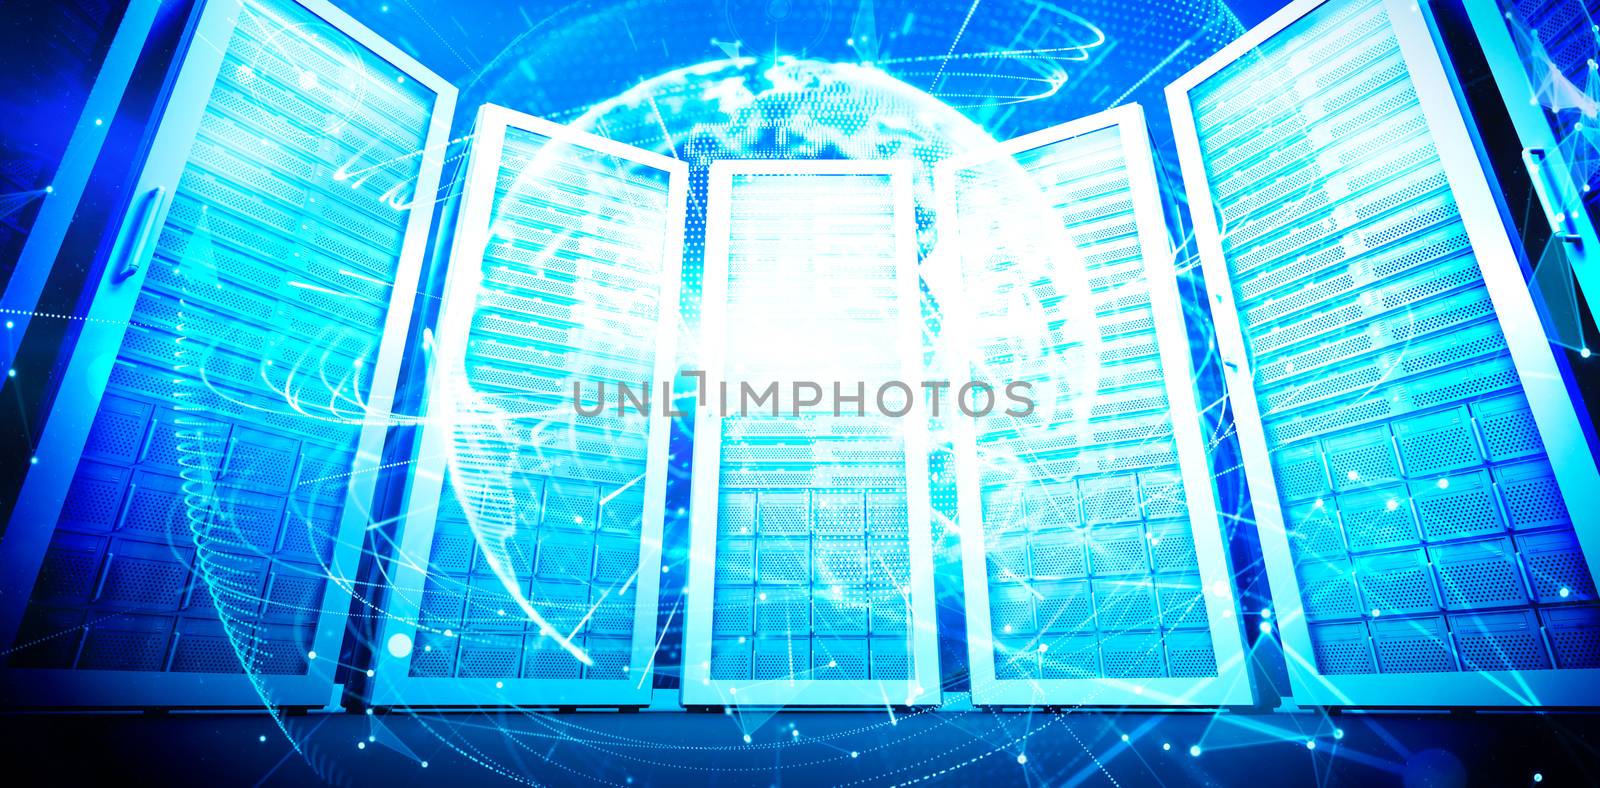 Global technology background in blue against composite image of server room